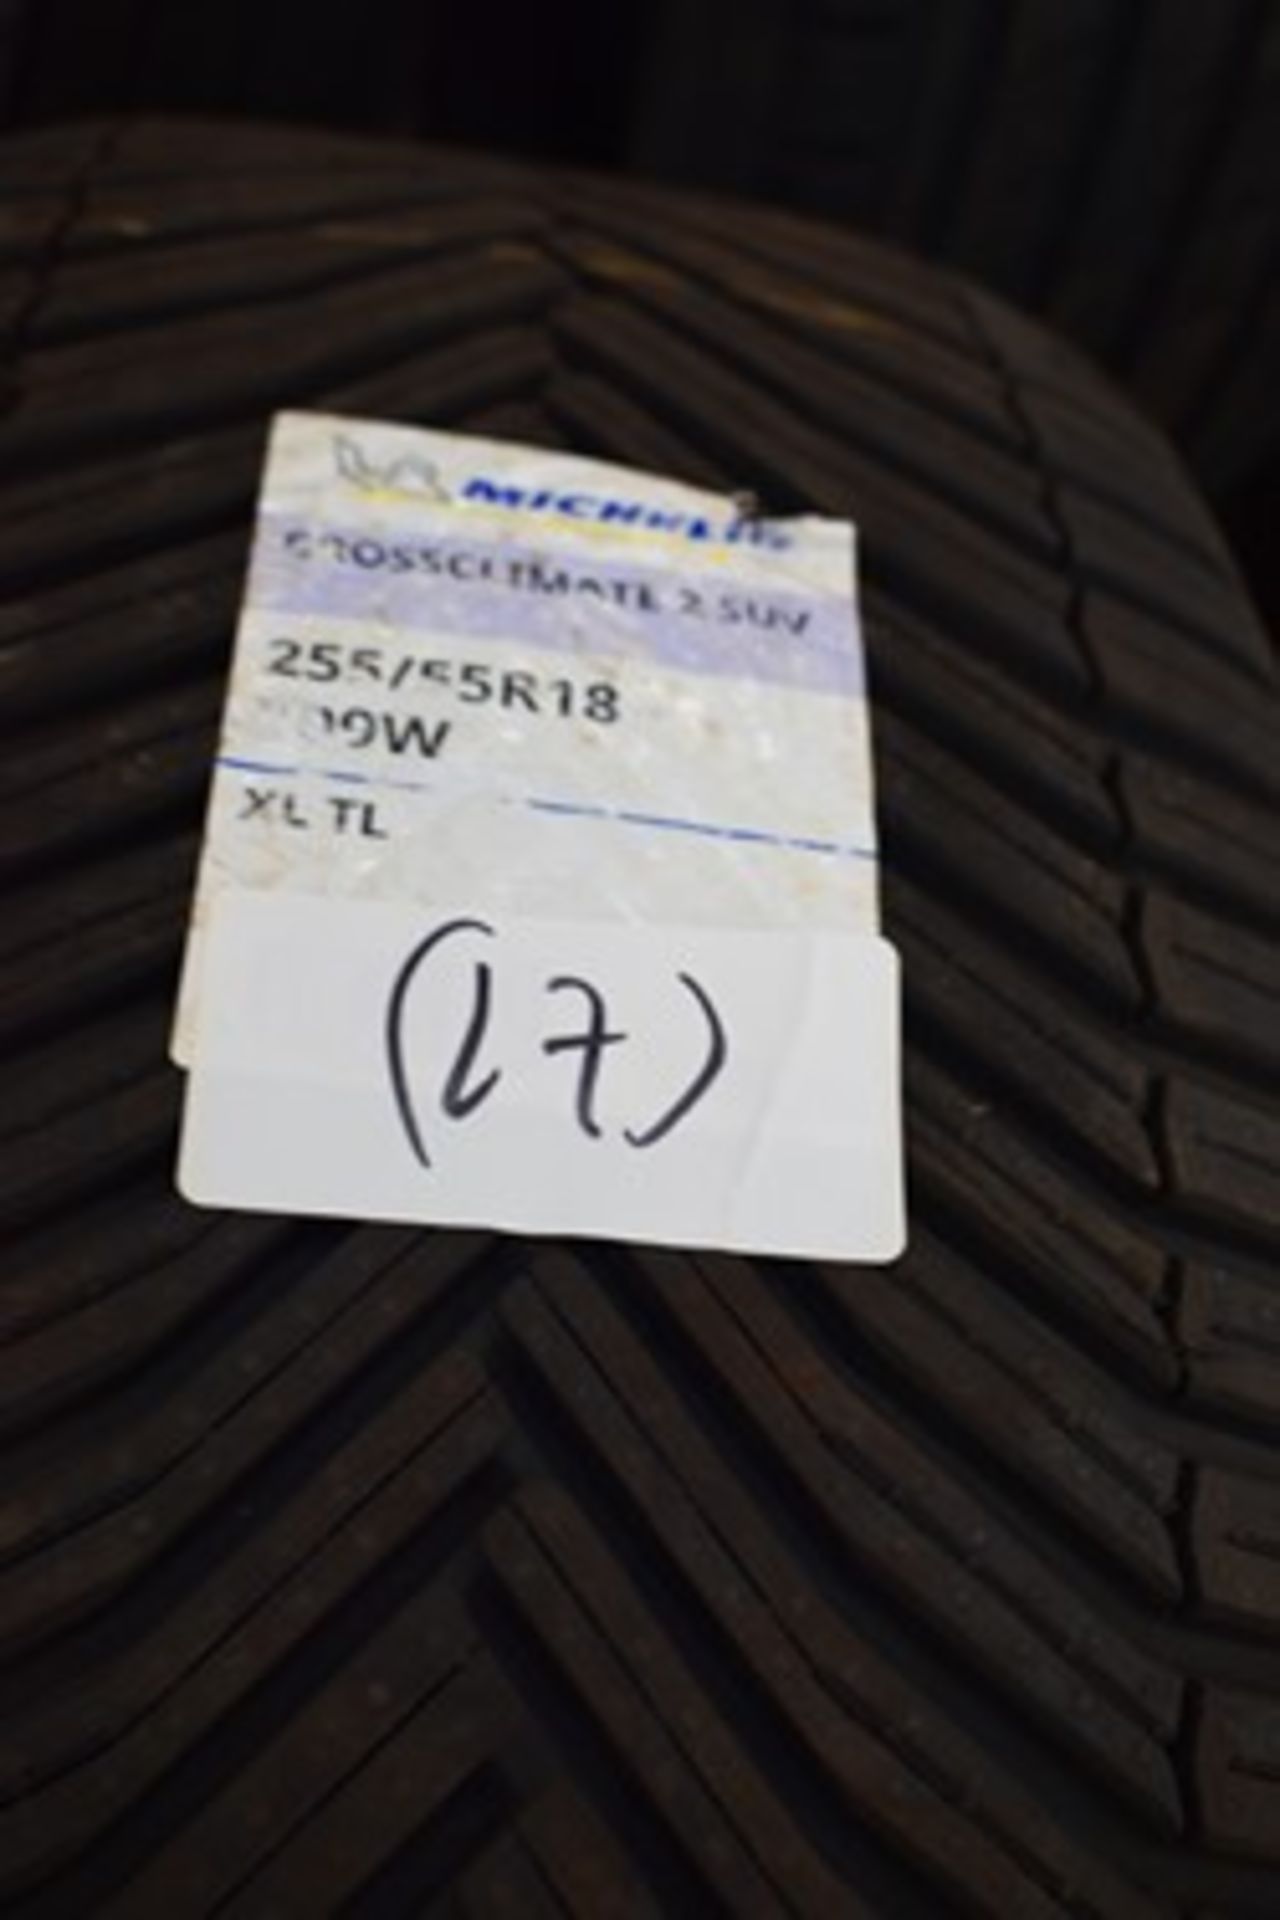 1 x Michelin Cross Climate 2 SUV tyre, size 255/55R18 109W XL TL - new with label (C2)(17)